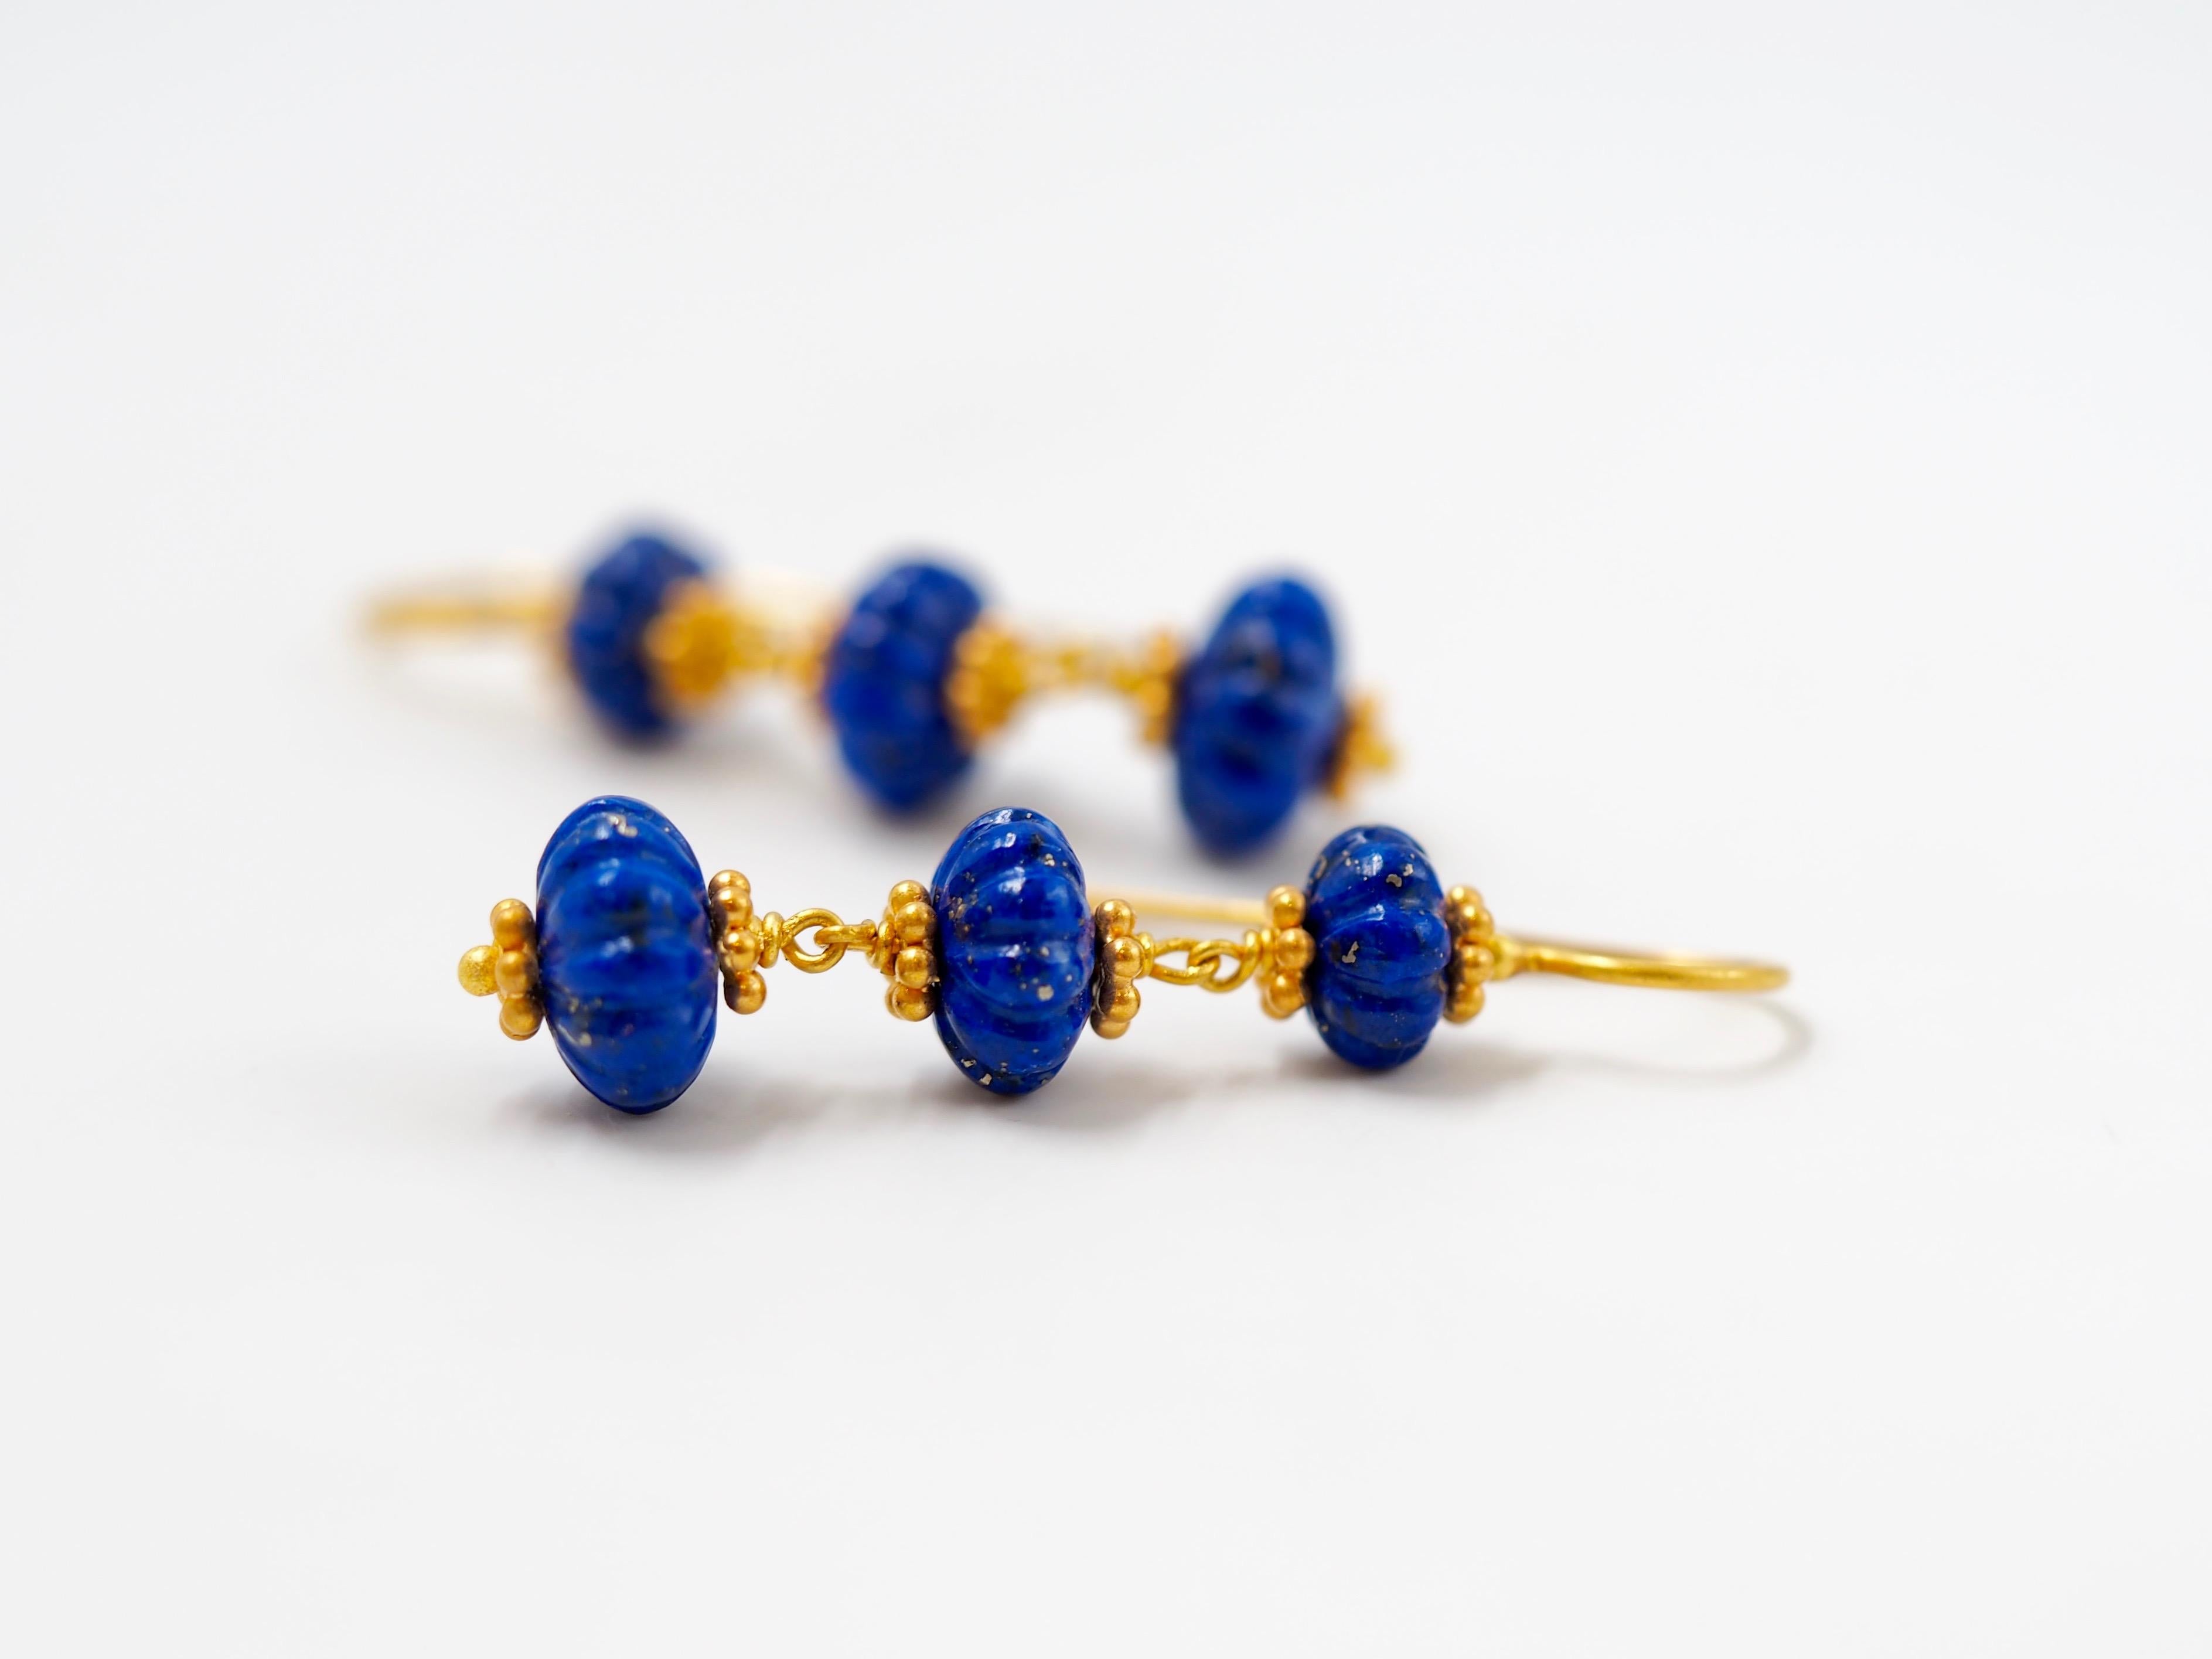 These earrings by Scrives are made of 6 watermelon shape beads of lapis lazuli for a total weight of approx 17 cts.
The watermelons show decreasing sizes. 
The same earrings exist also in translucent aquamarine and in amethyst.

This one-of-a-kind